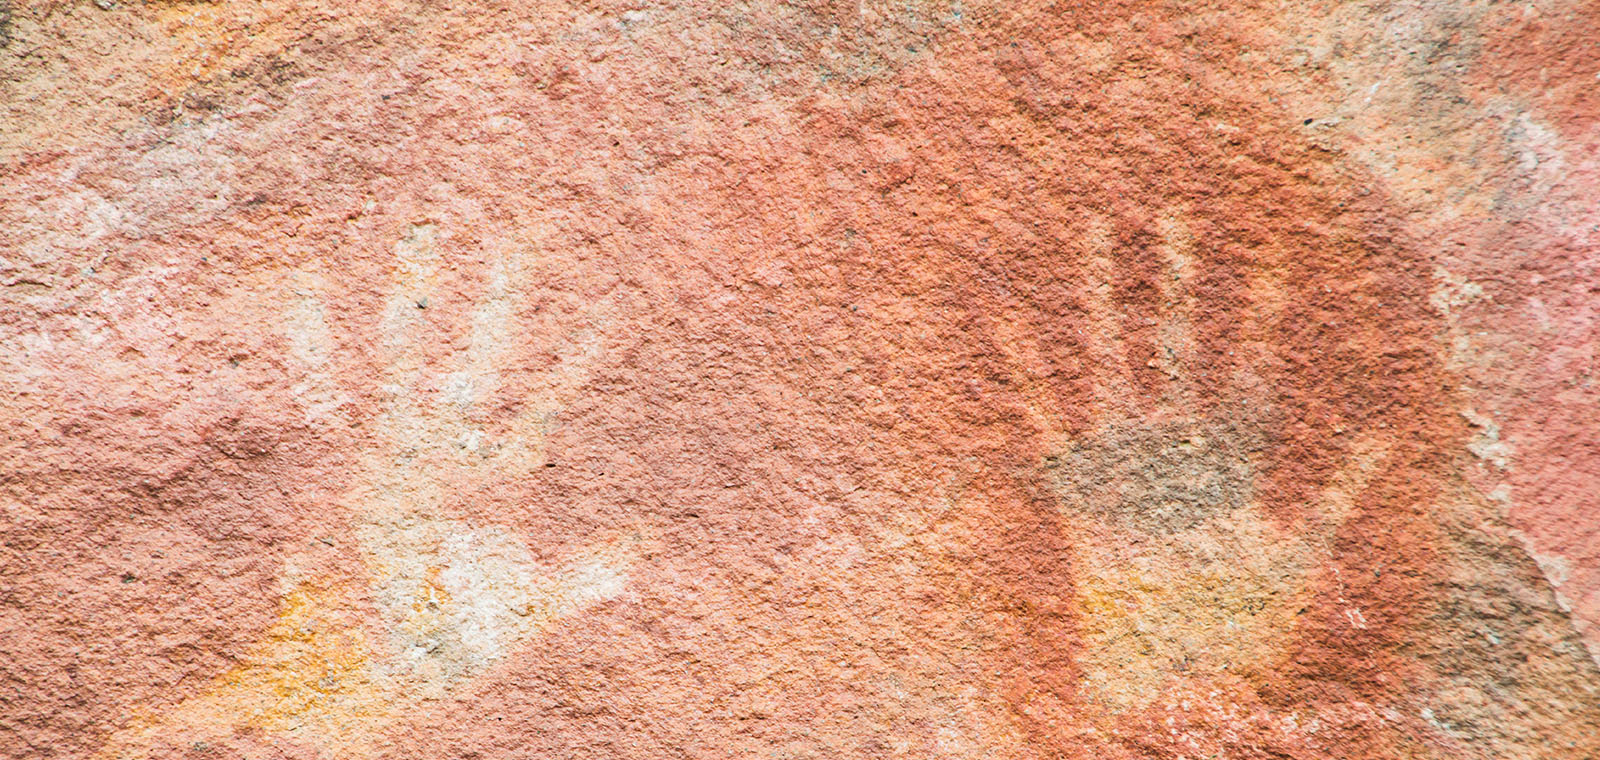 Two large handprints sprawl across the wall of a bright red cave, blending with the color and texture of the rock.